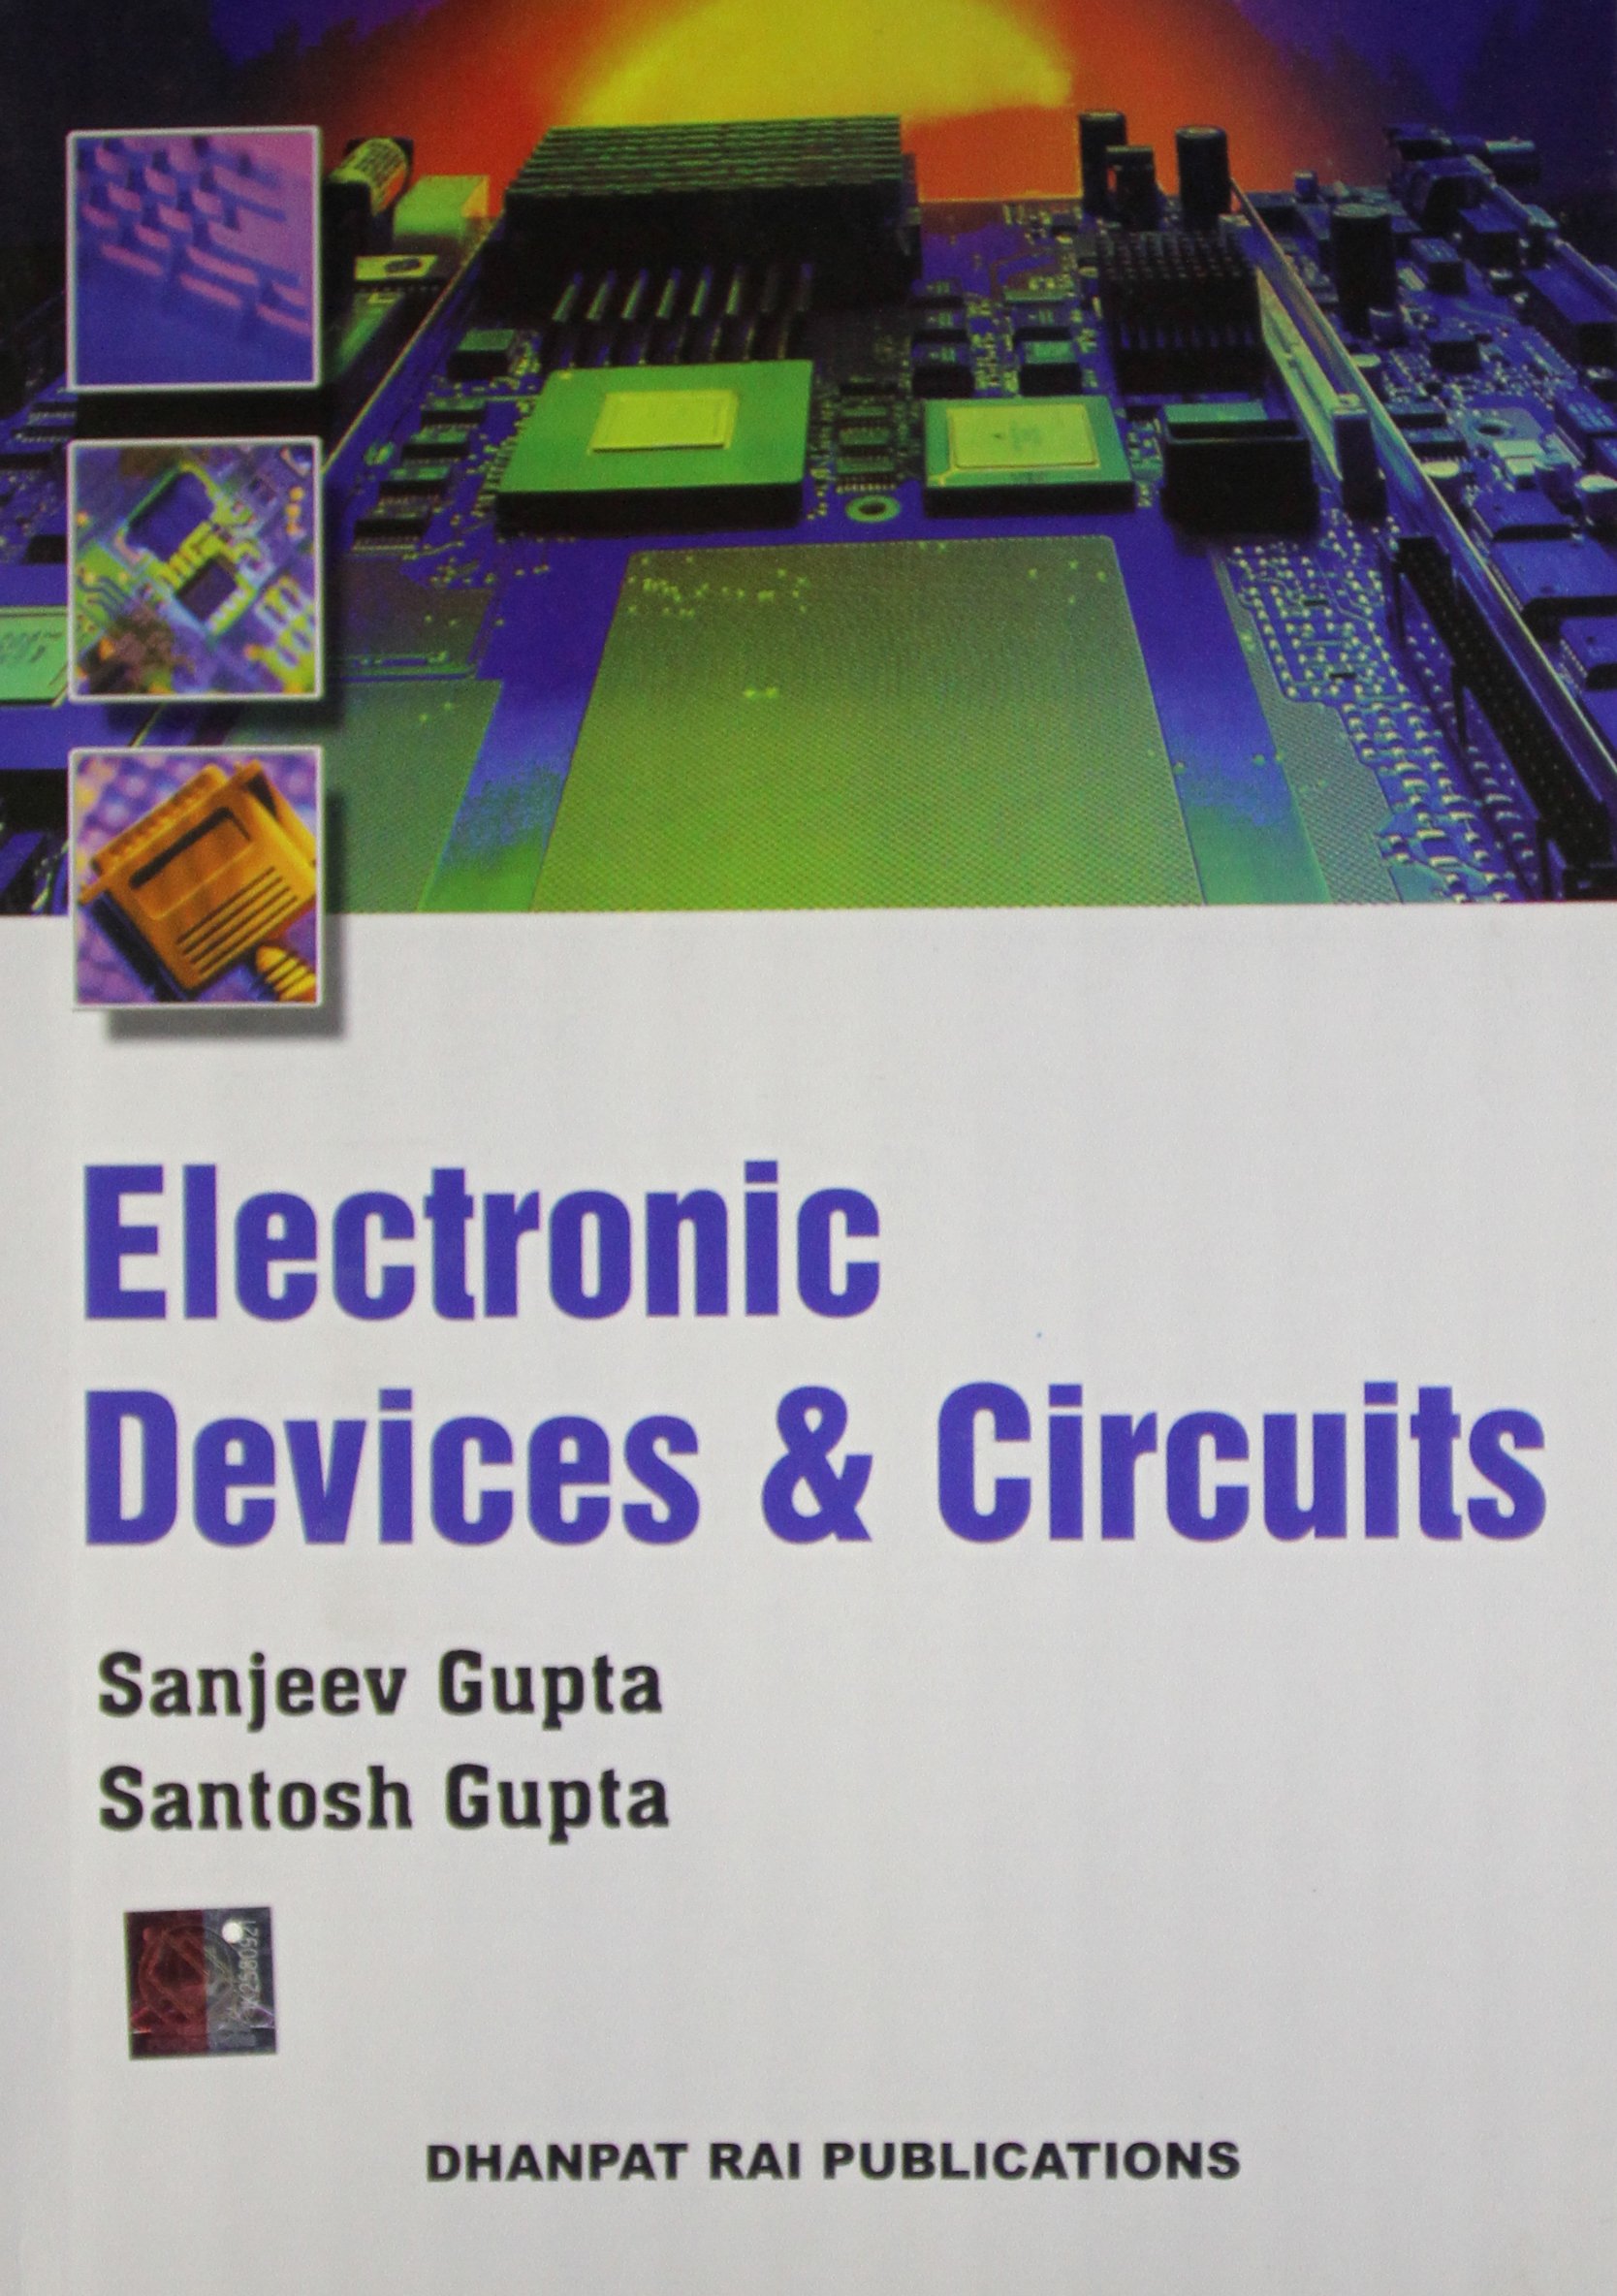 electronic devices and circuits by sanjeev gupta pdf viewer